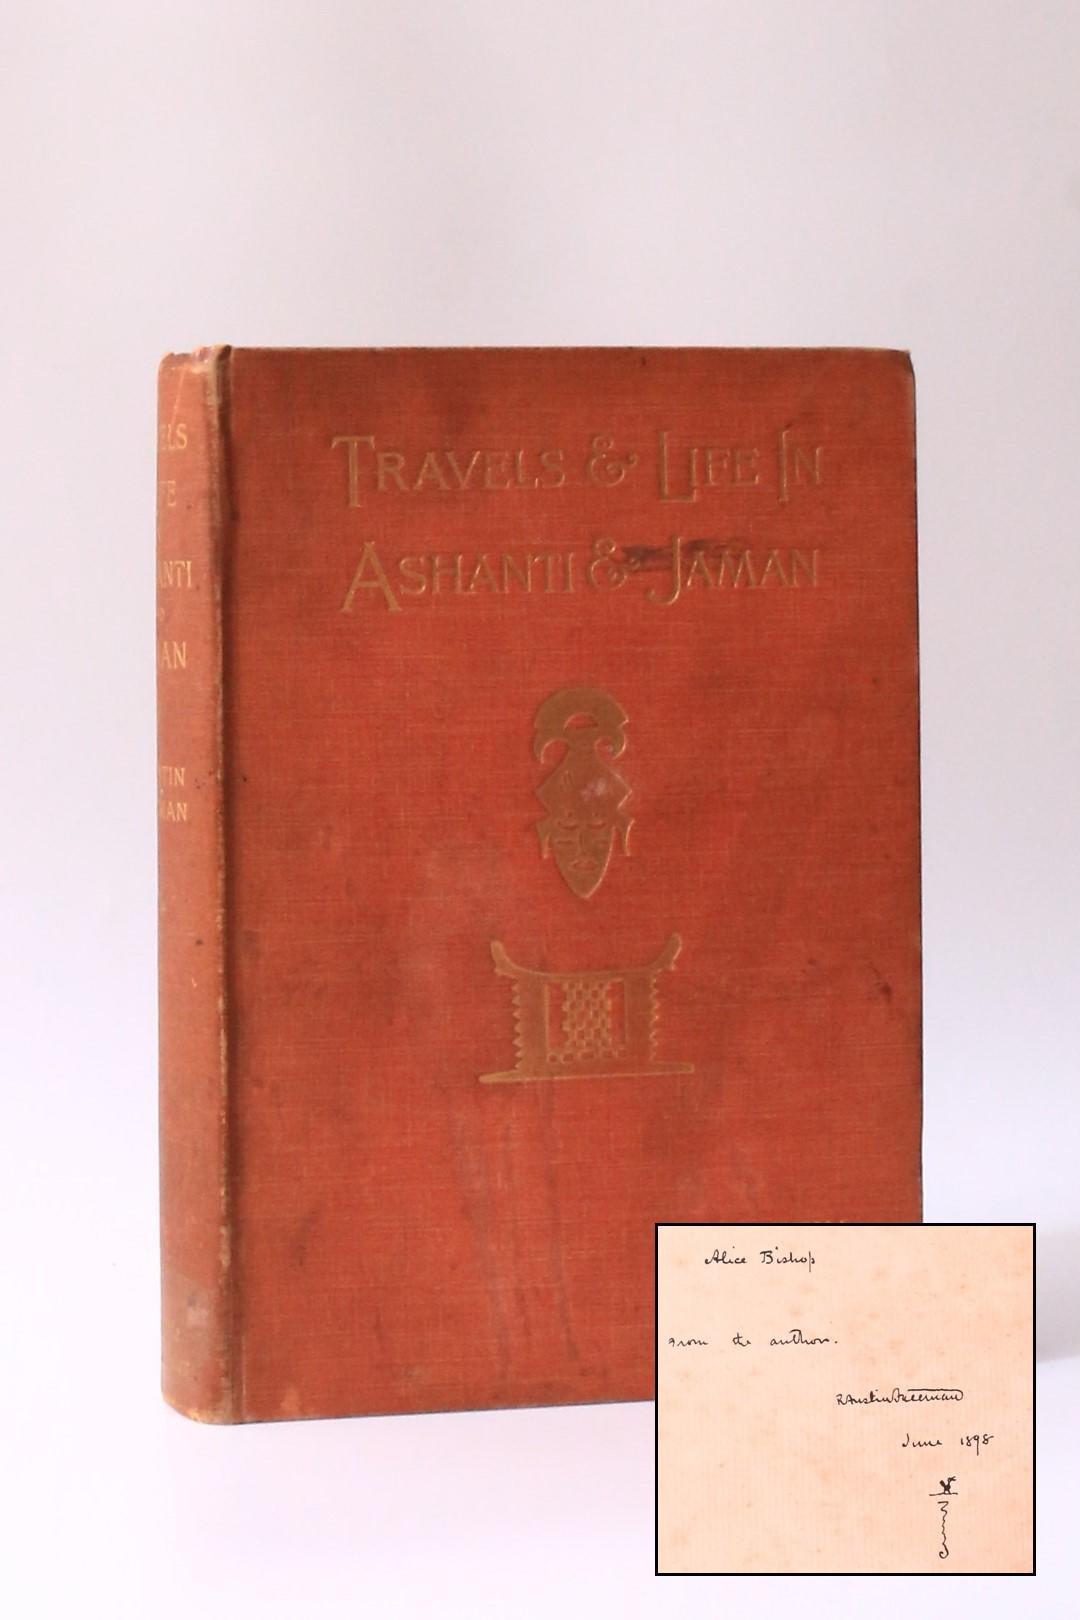 R. Austin Freeman - Travels & Life in Ashanti & Jaman - Constable Westminster, 1898, Signed First Edition.